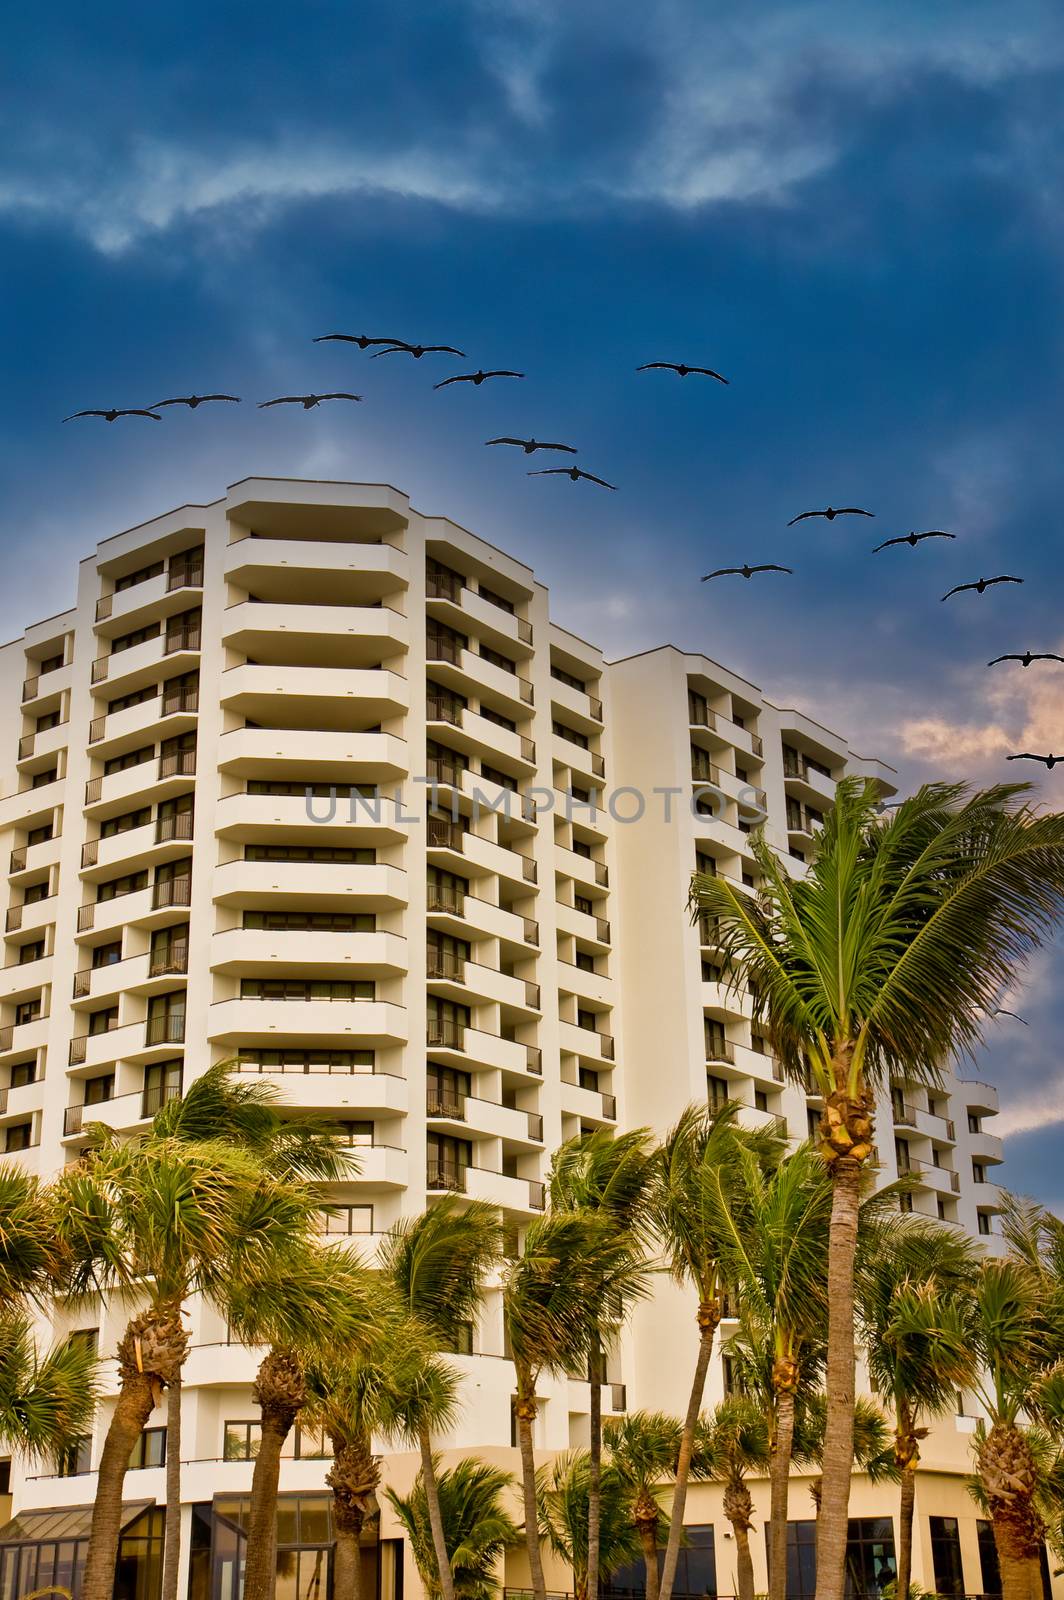 Seagulls Over Condos and Palm Trees by dbvirago